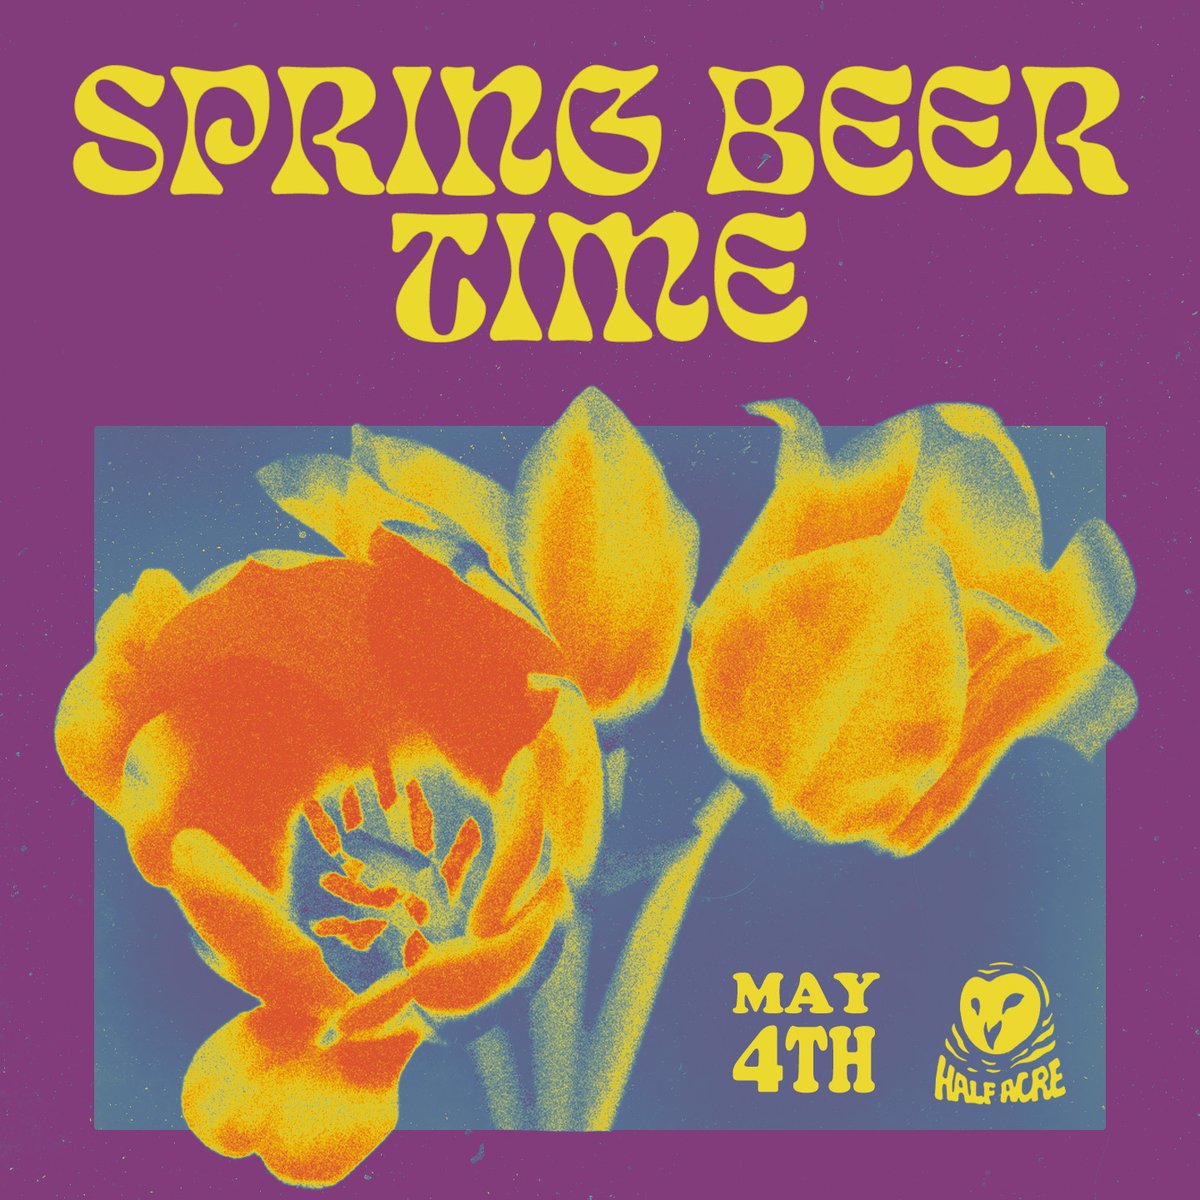 Circle Sat May 4 on your calendar to spend the afternoon & evening with your friends at Half Acre. SPRING BEER TIME is a celebration of Beer Garden season, as we gather under warm rays of sun with cold pints of beer. This is a free, all ages, dog-friendly party from 2-10pm.